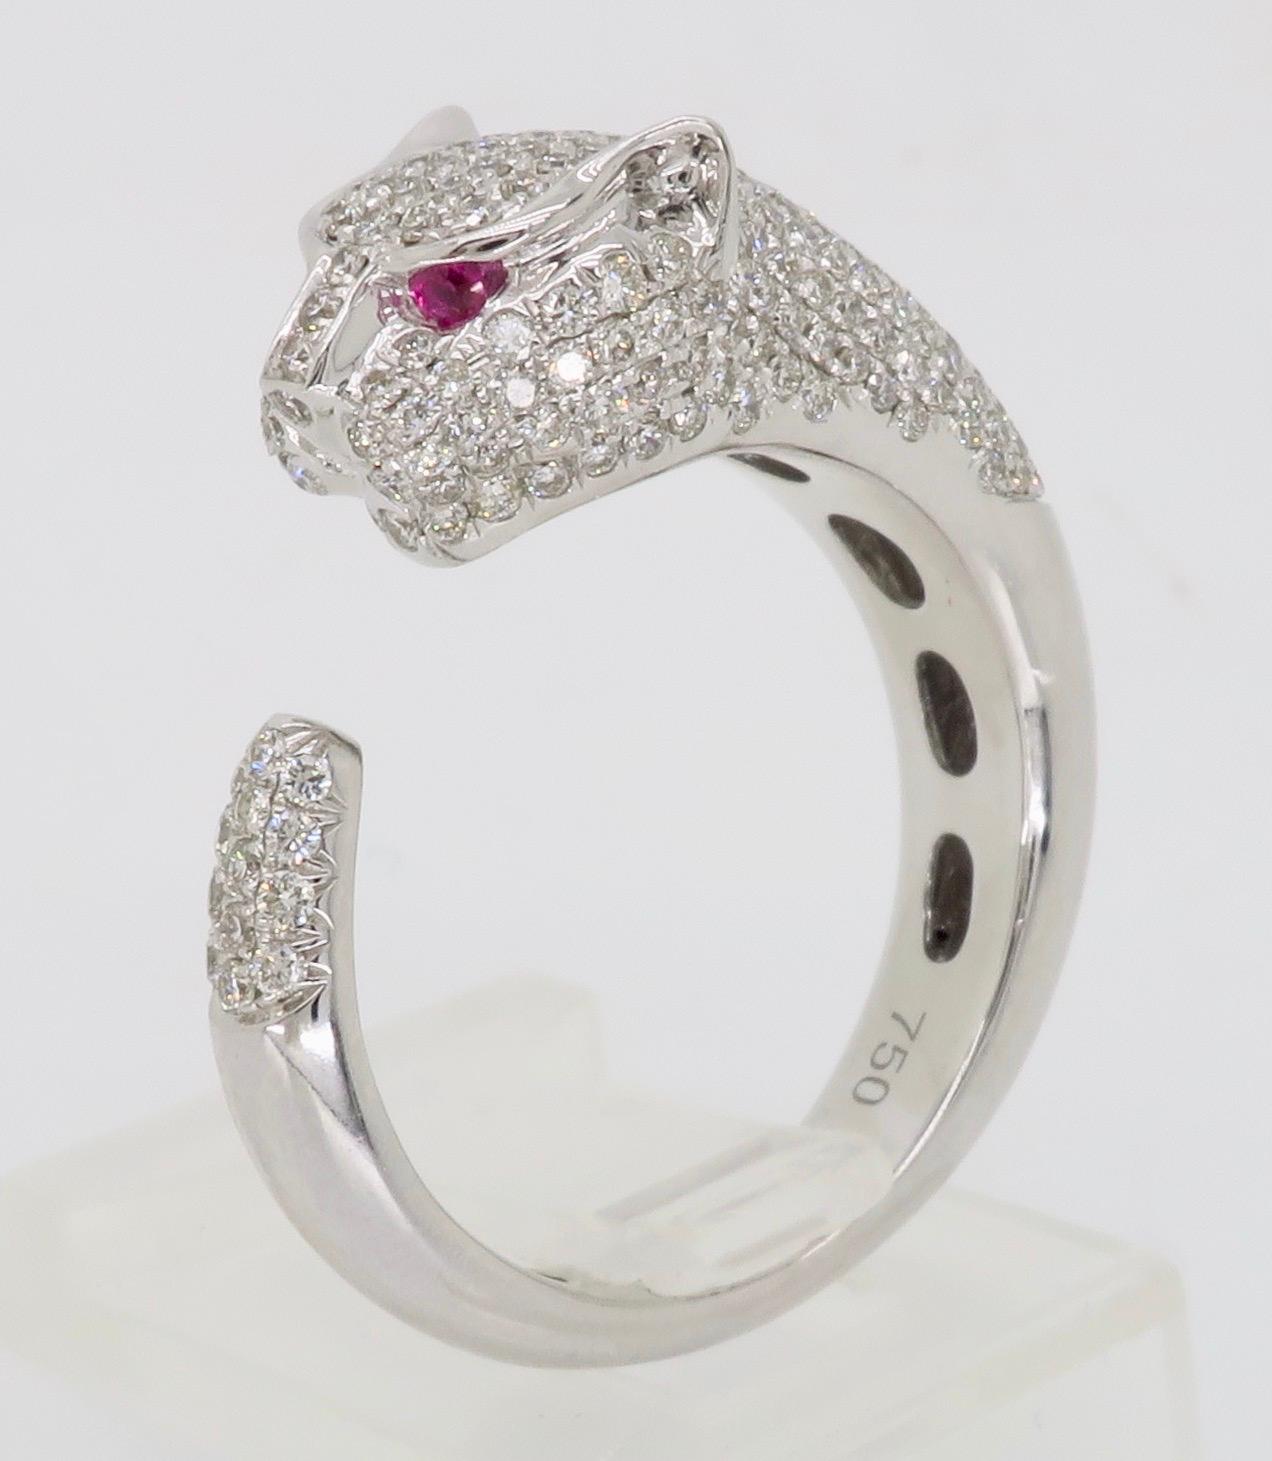 Intricate 18k white gold Diamond Panther ring made with Ruby Eyes.

Gemstone: Diamond and Ruby
Gemstone Carat Weight: .04CTW 
Diamond Carat Weight:  .80CTW
Diamond Cut: Round Brilliant Cut
Color: Average F-H
Clarity: Average VS
Metal: 18K White